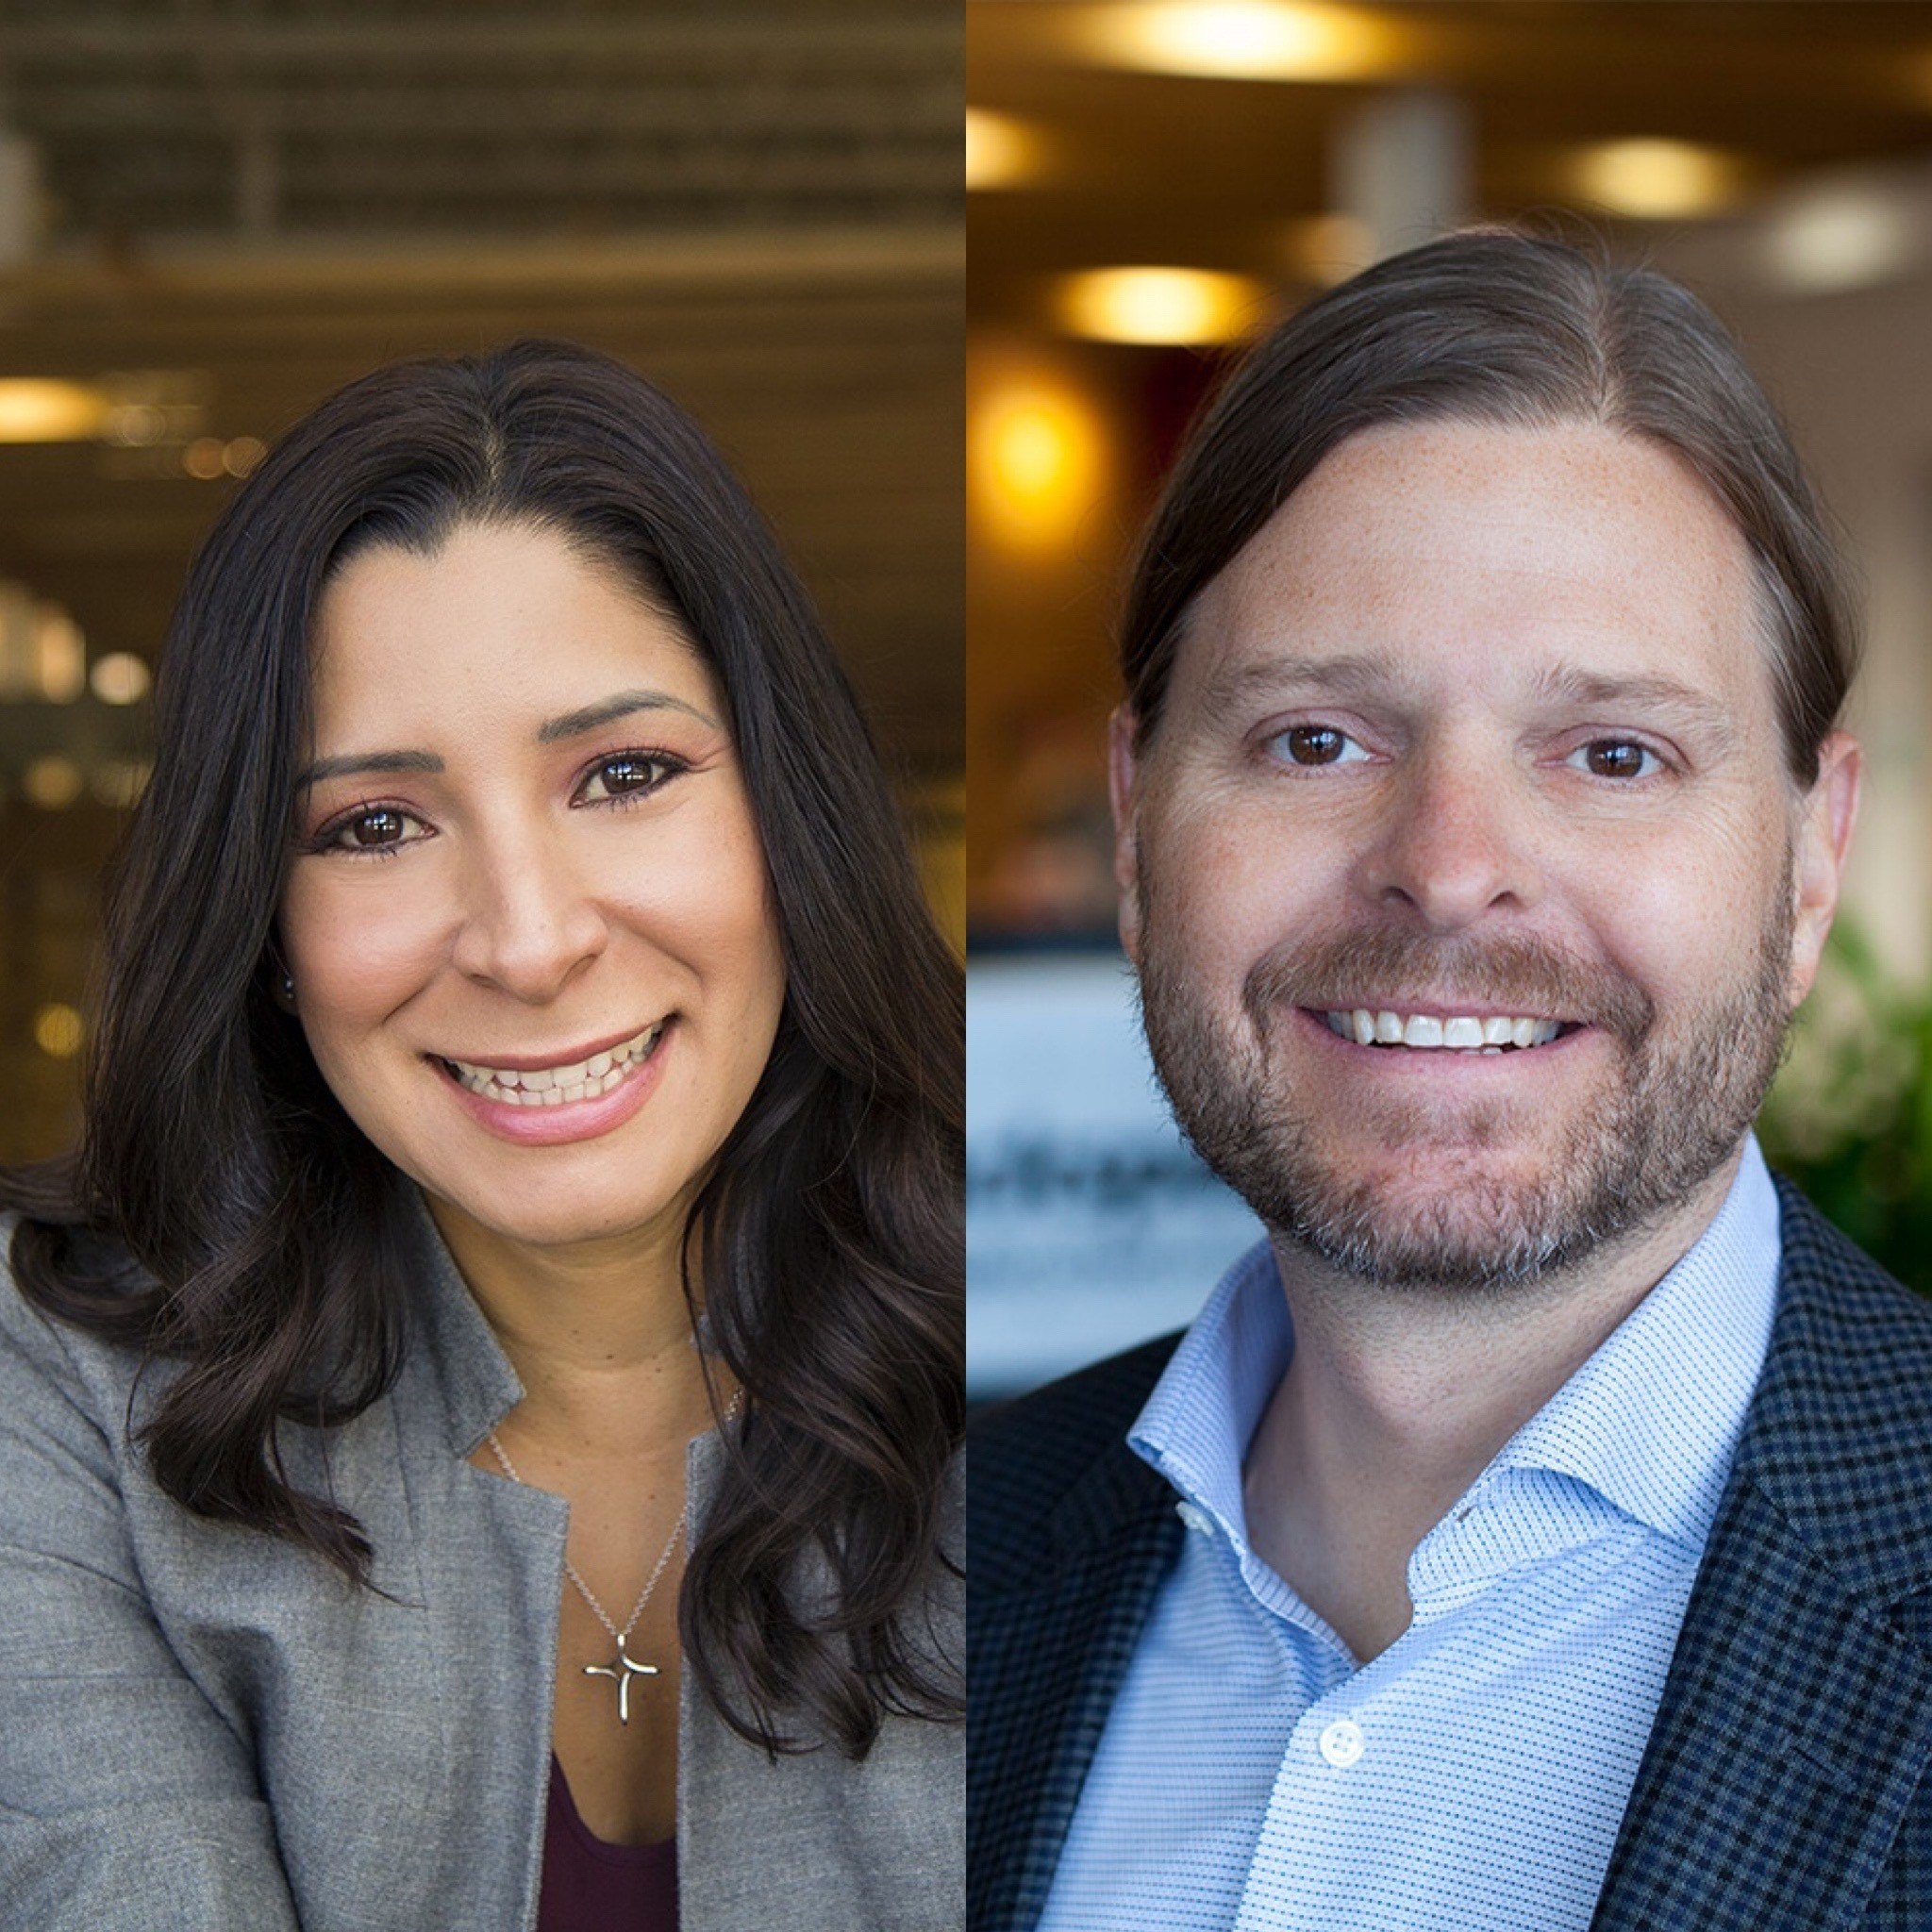 Two elite Rackspace executives recognized on CRN’s 2020 Channel Chiefs list